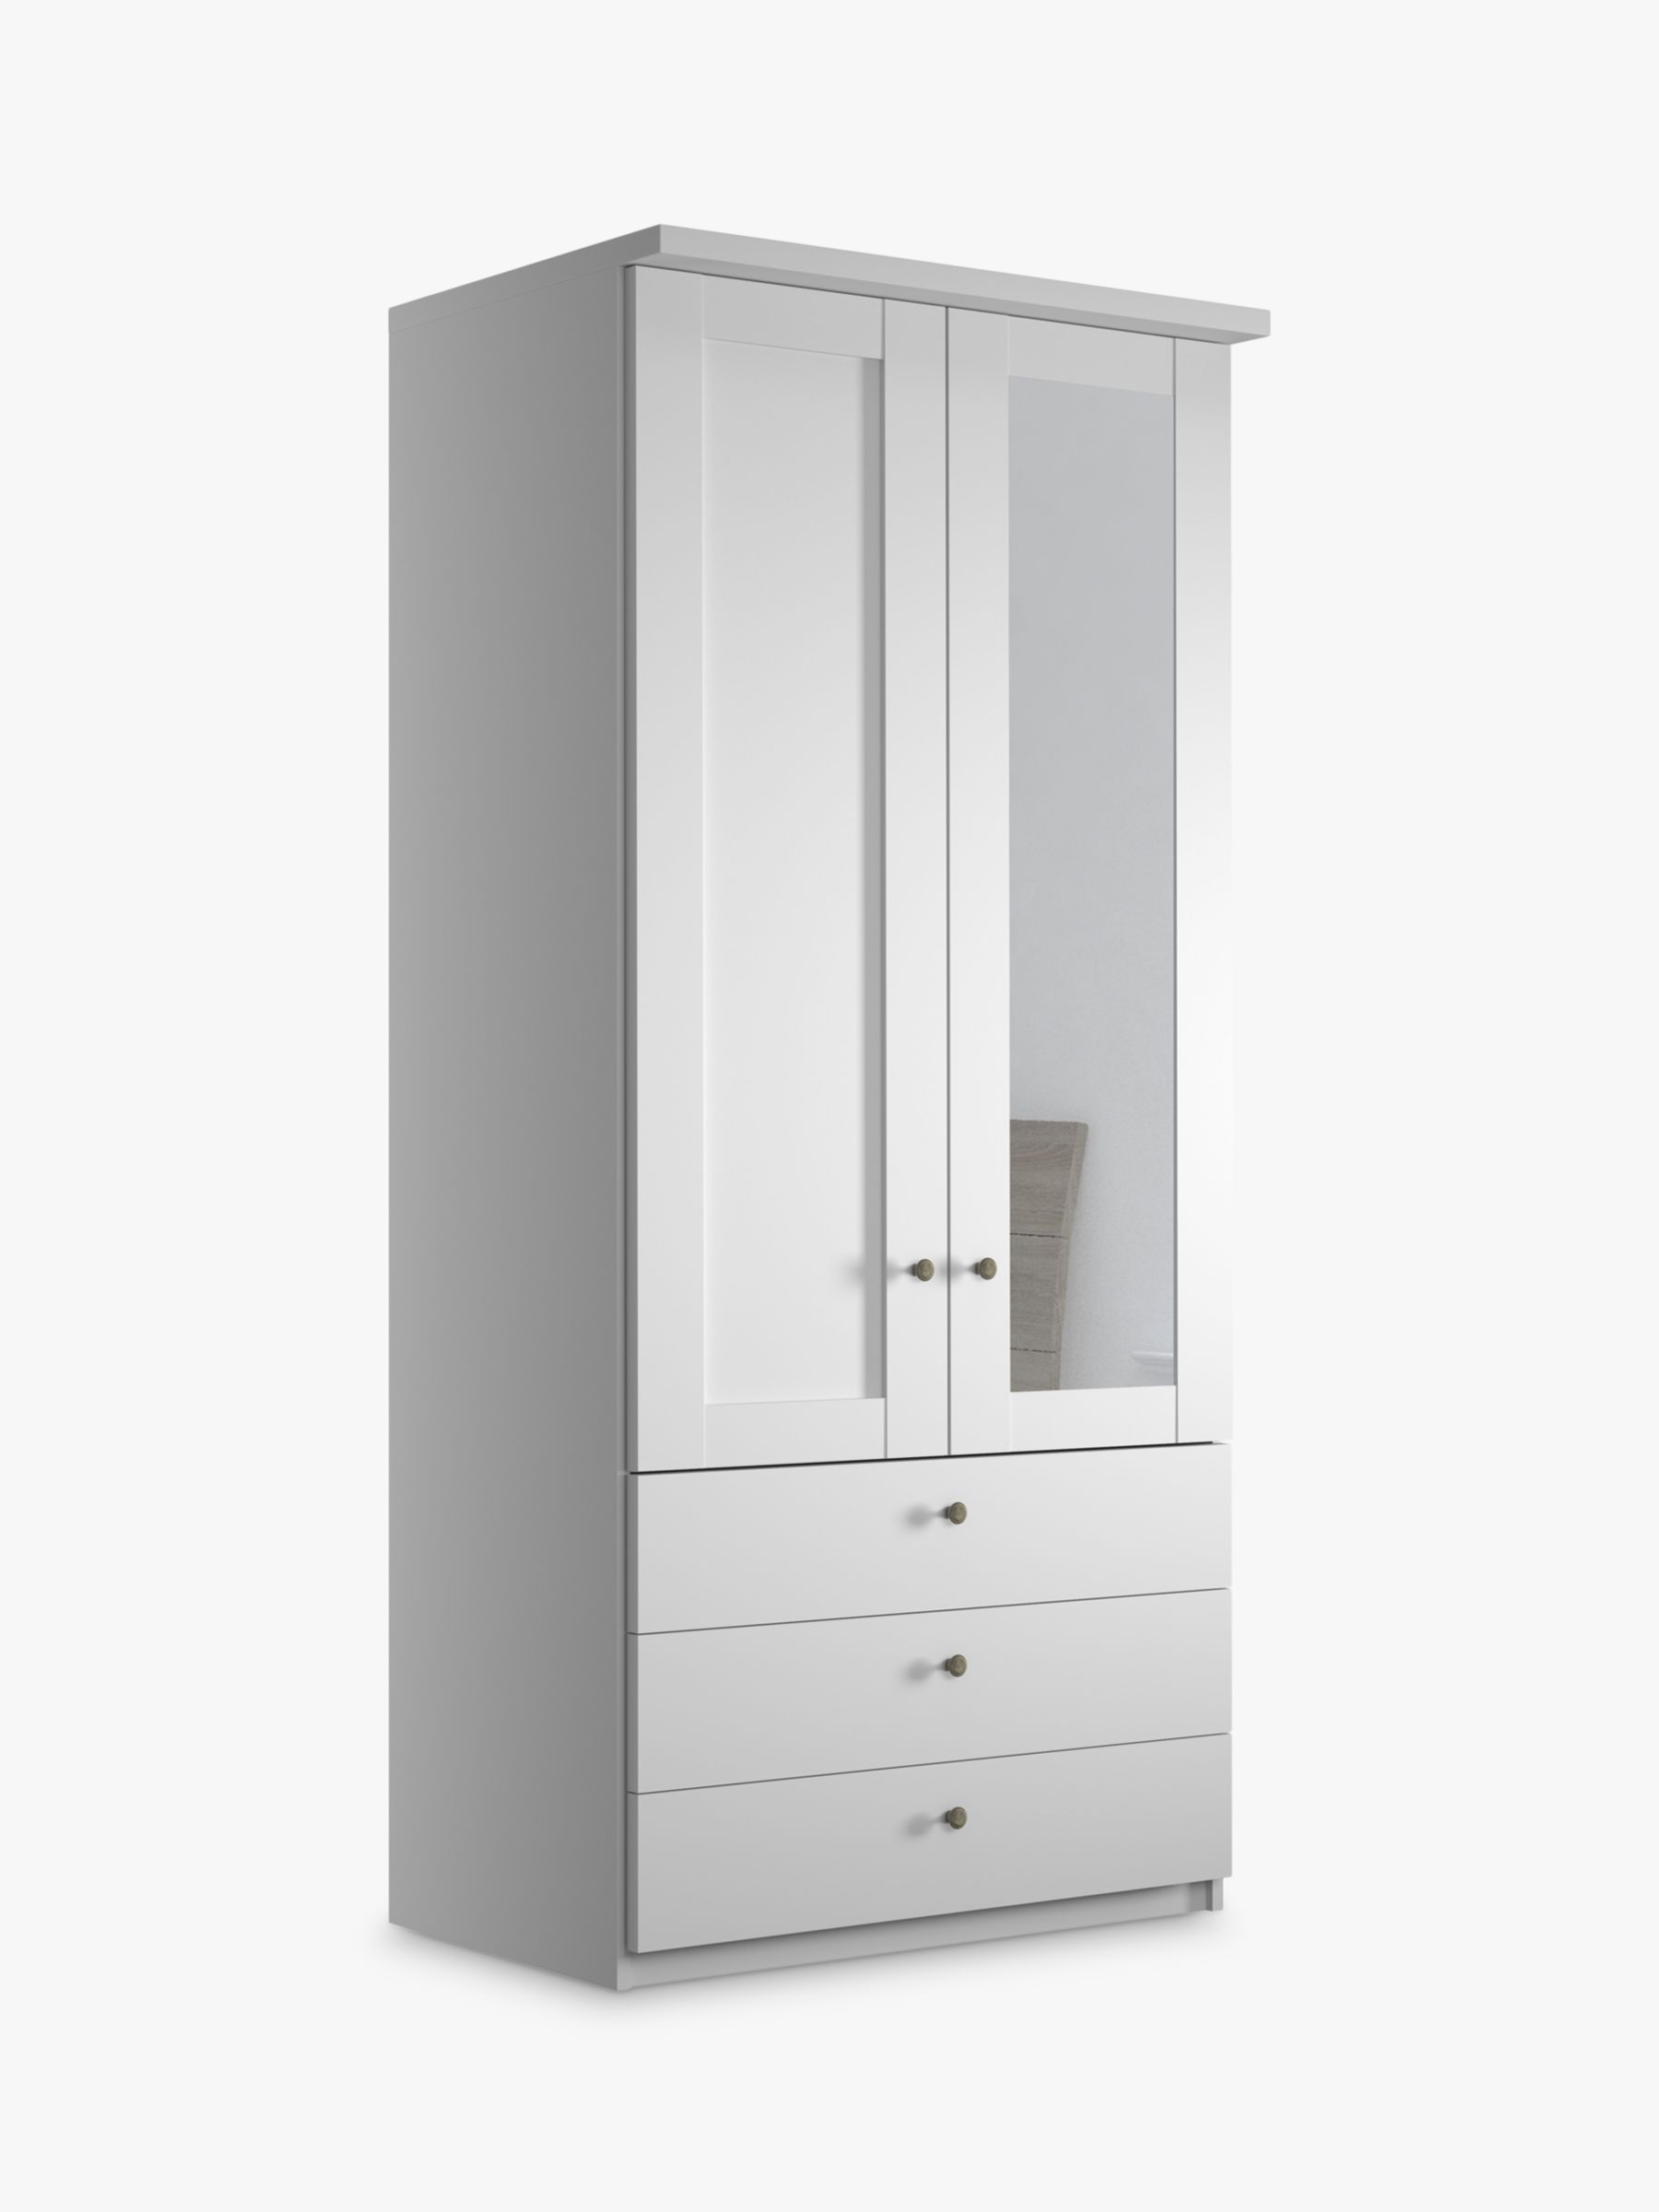 Photo of John lewis marlow 100cm hinged wardrobe with right mirror & 3 drawers